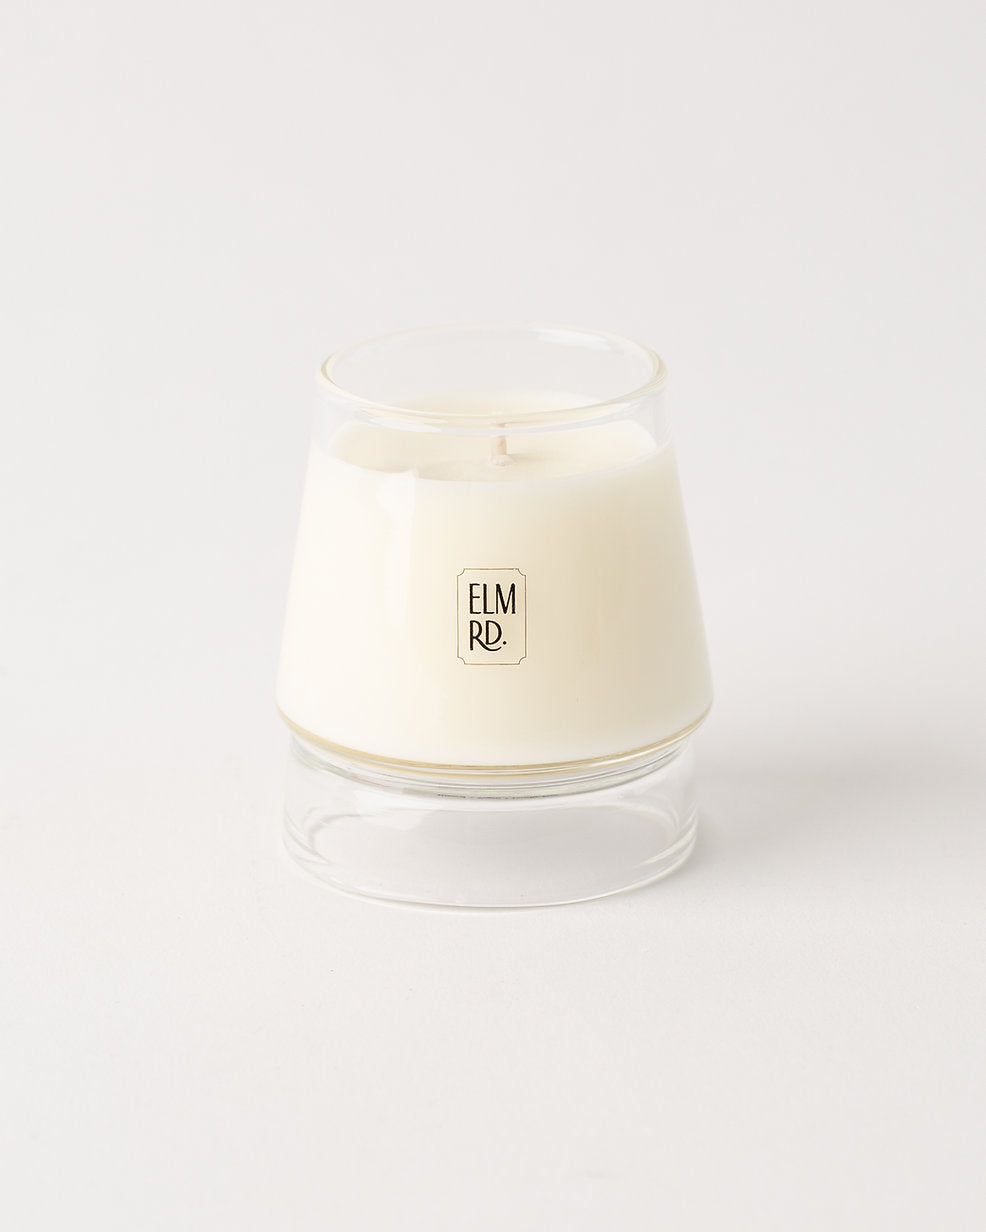 Elm Rd. Happiness Mini Aromatherapy Candle